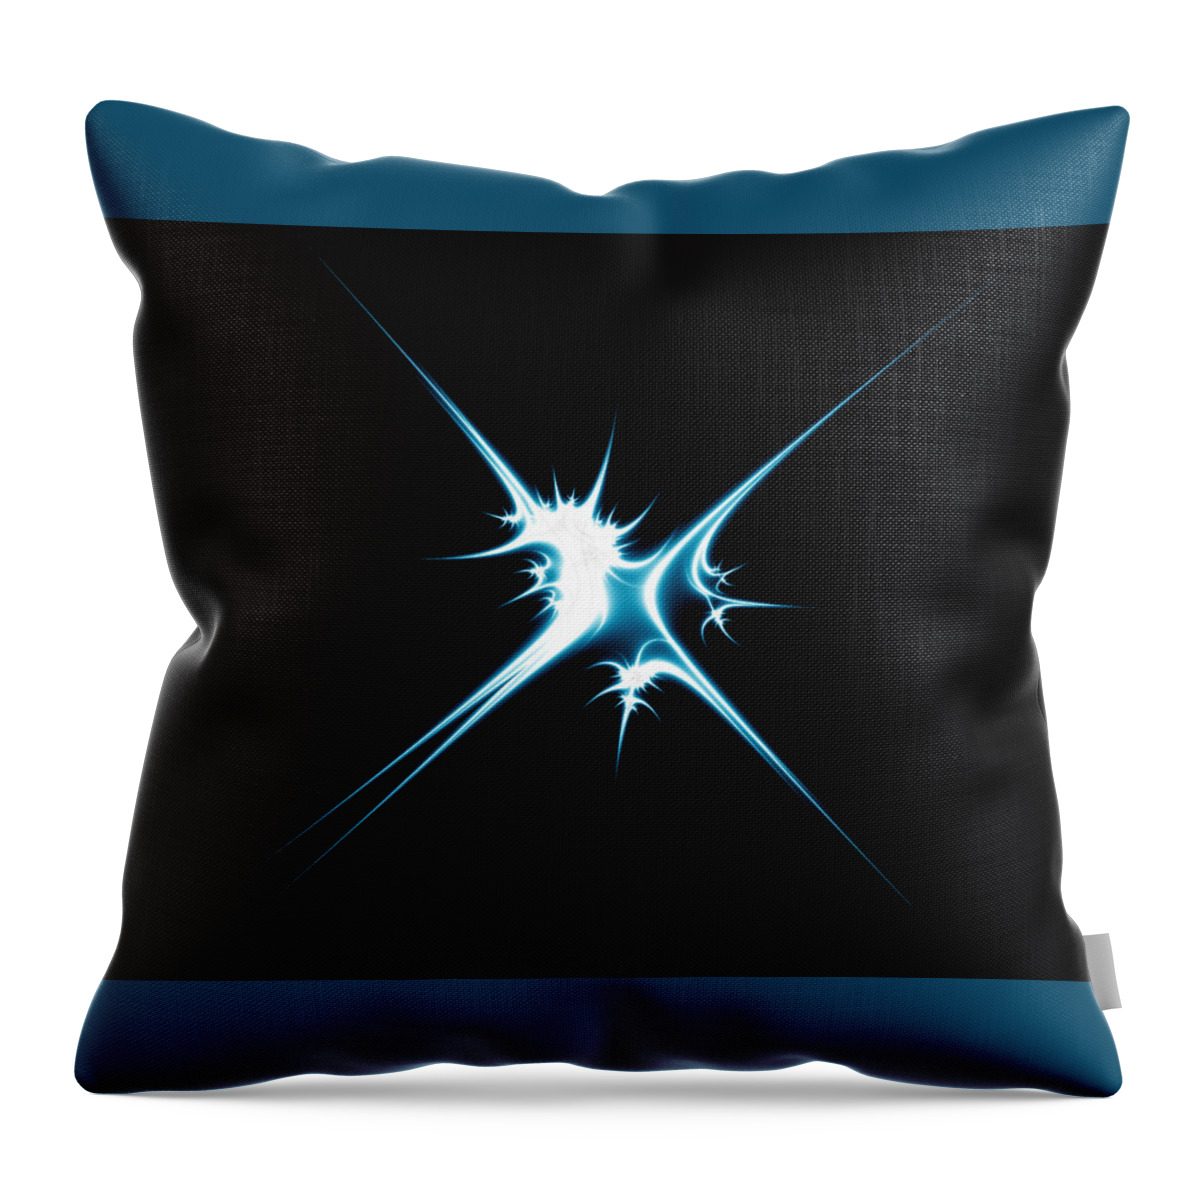 Blue Throw Pillow featuring the digital art Blue #17 by Super Lovely